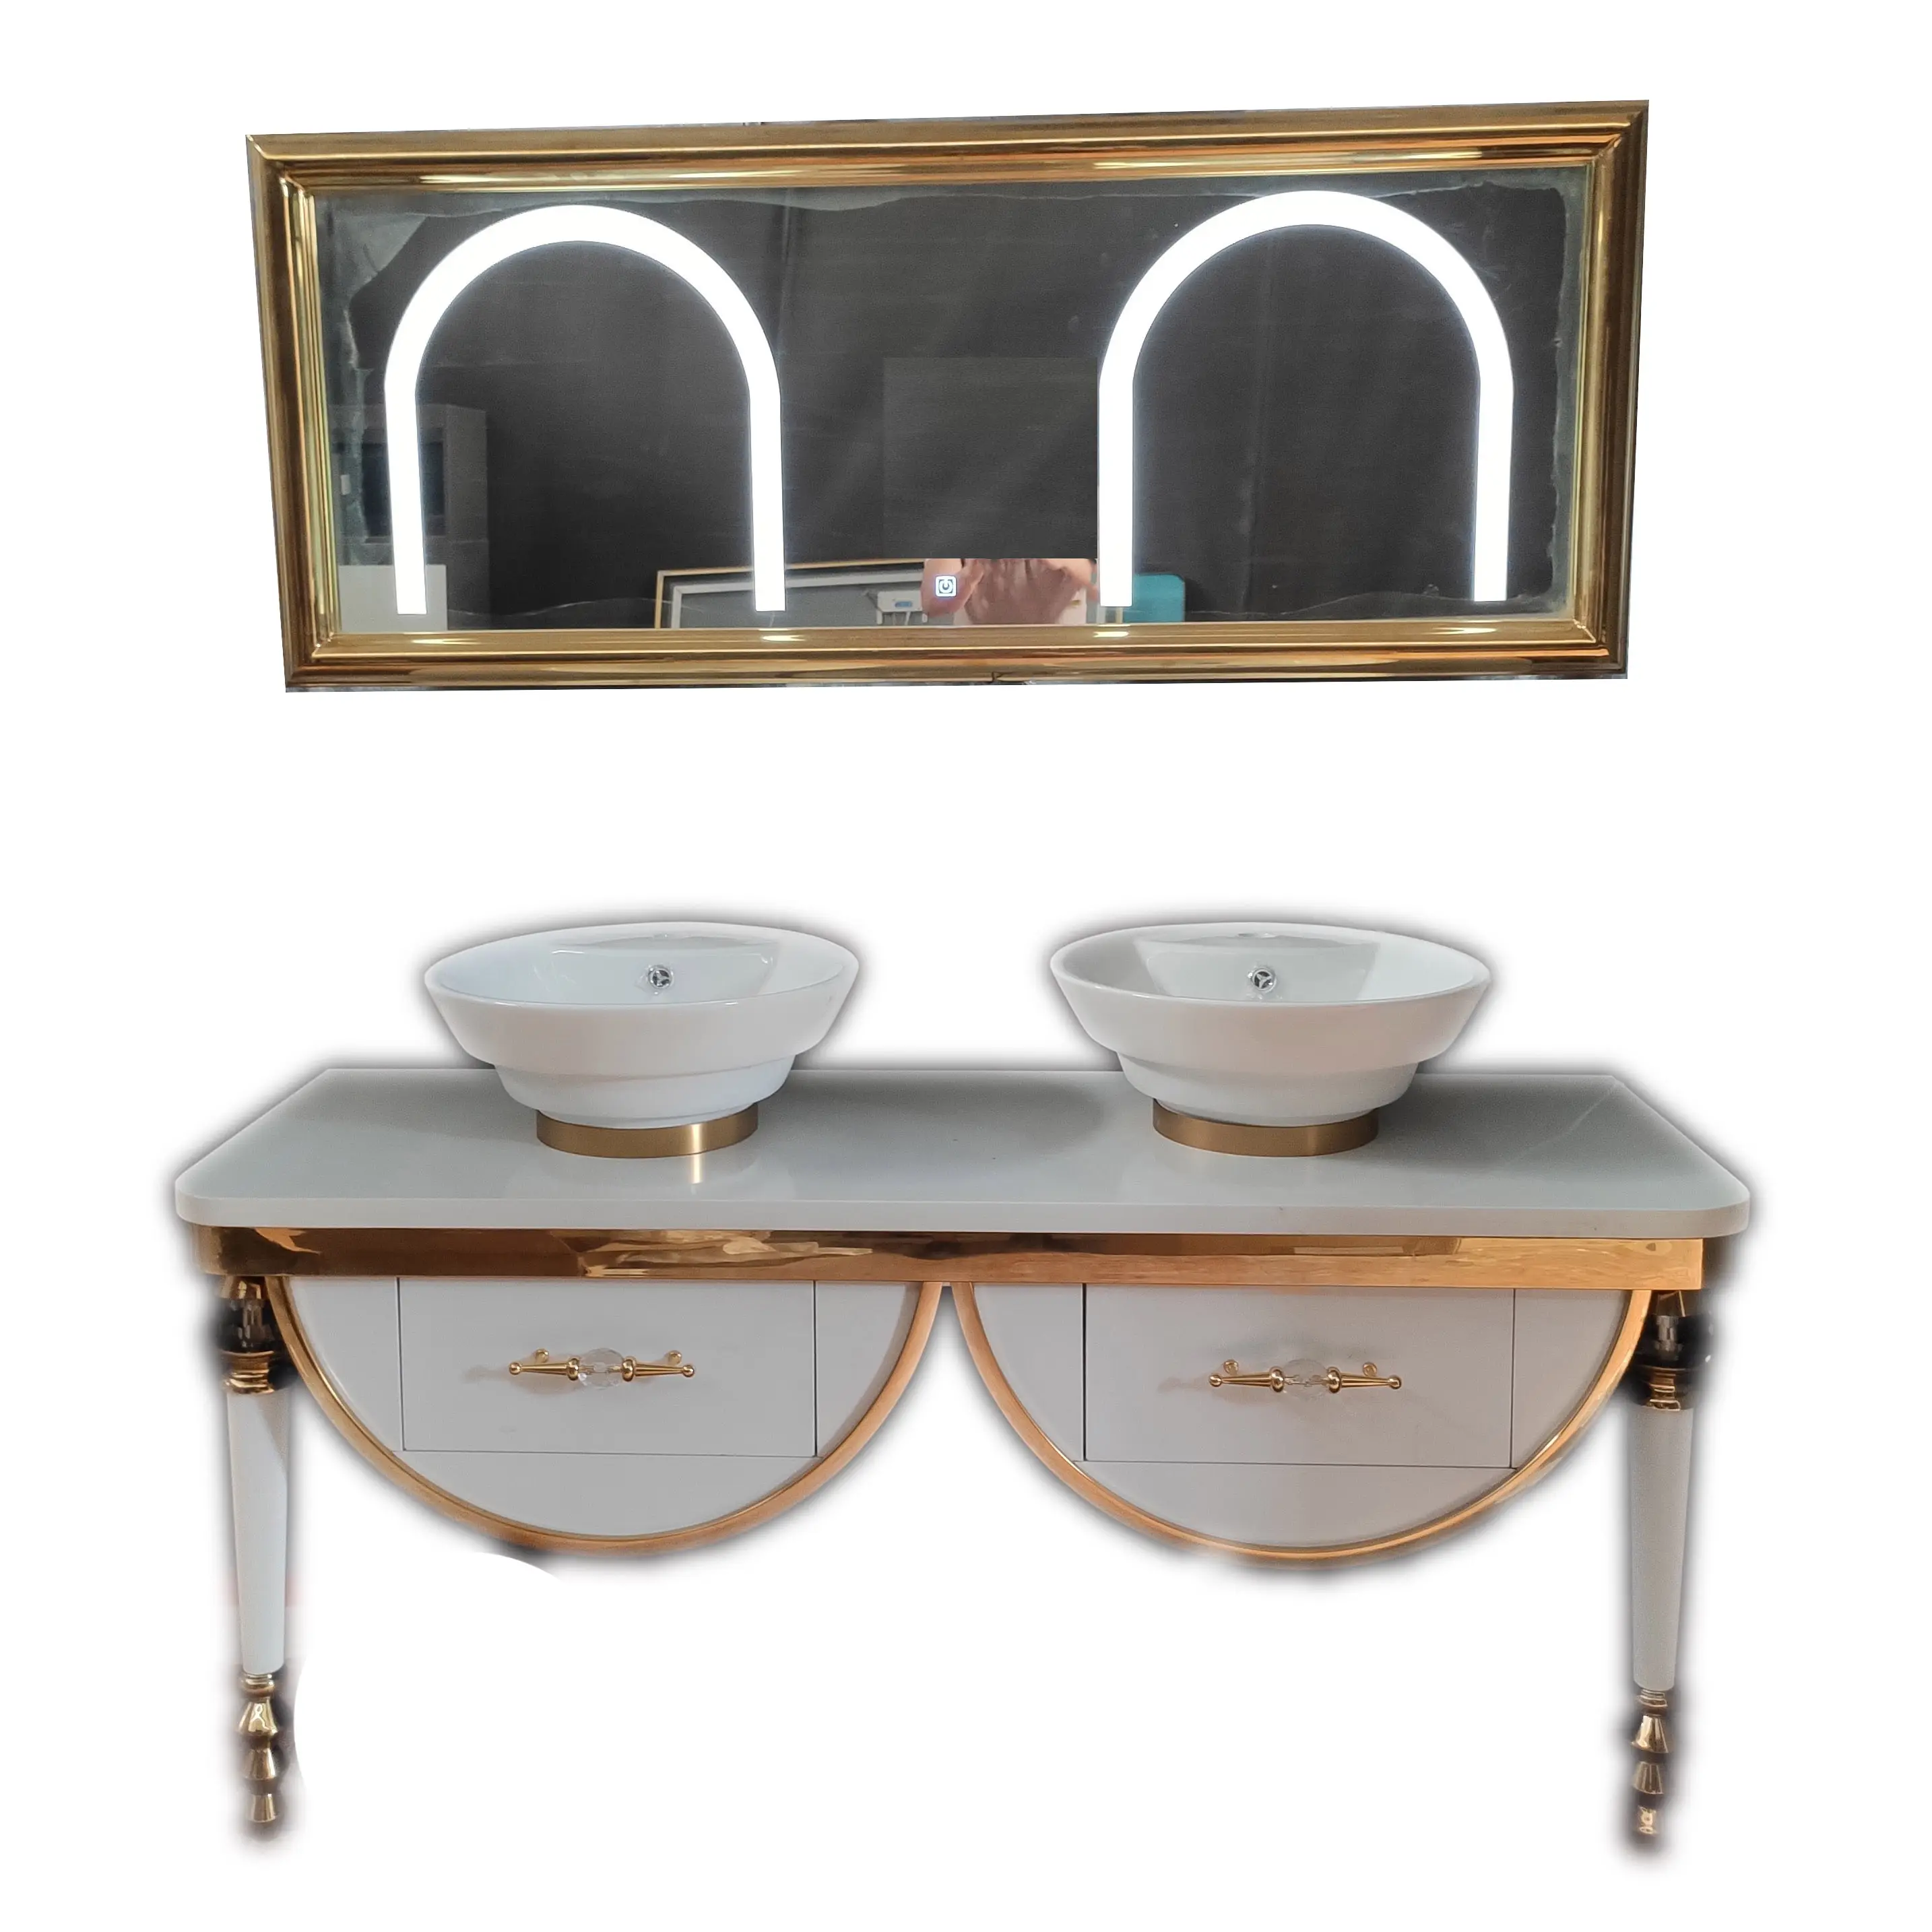 golden antique double sink stainless steel bathroom vanity with LED mirror